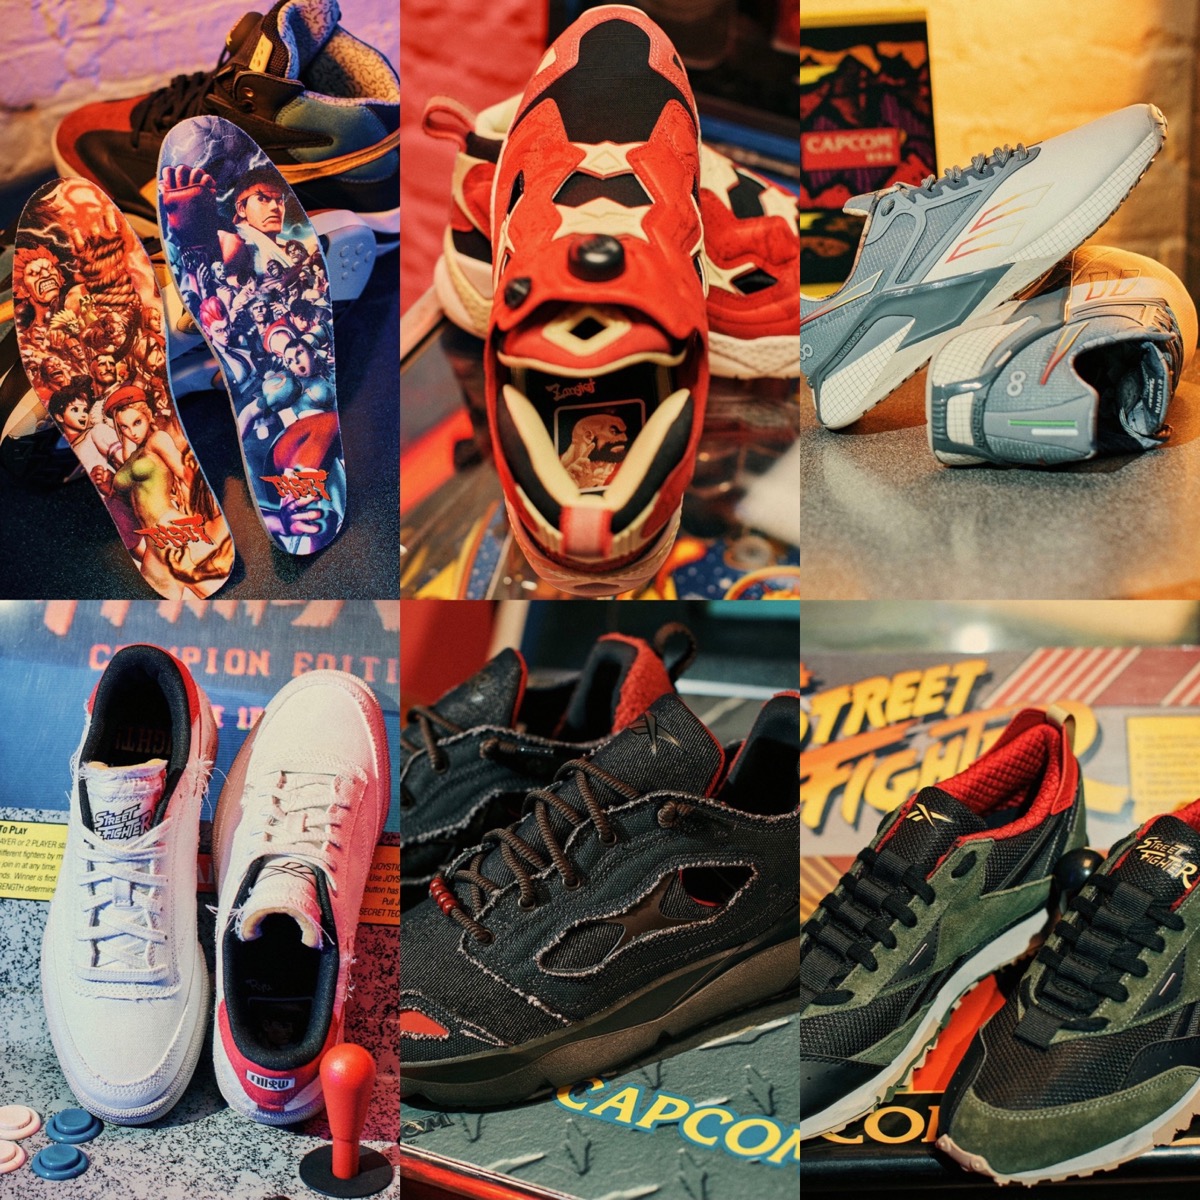 Street Fighter × Reebok “BECOME A CHAMPION” Collectionが国内12月15